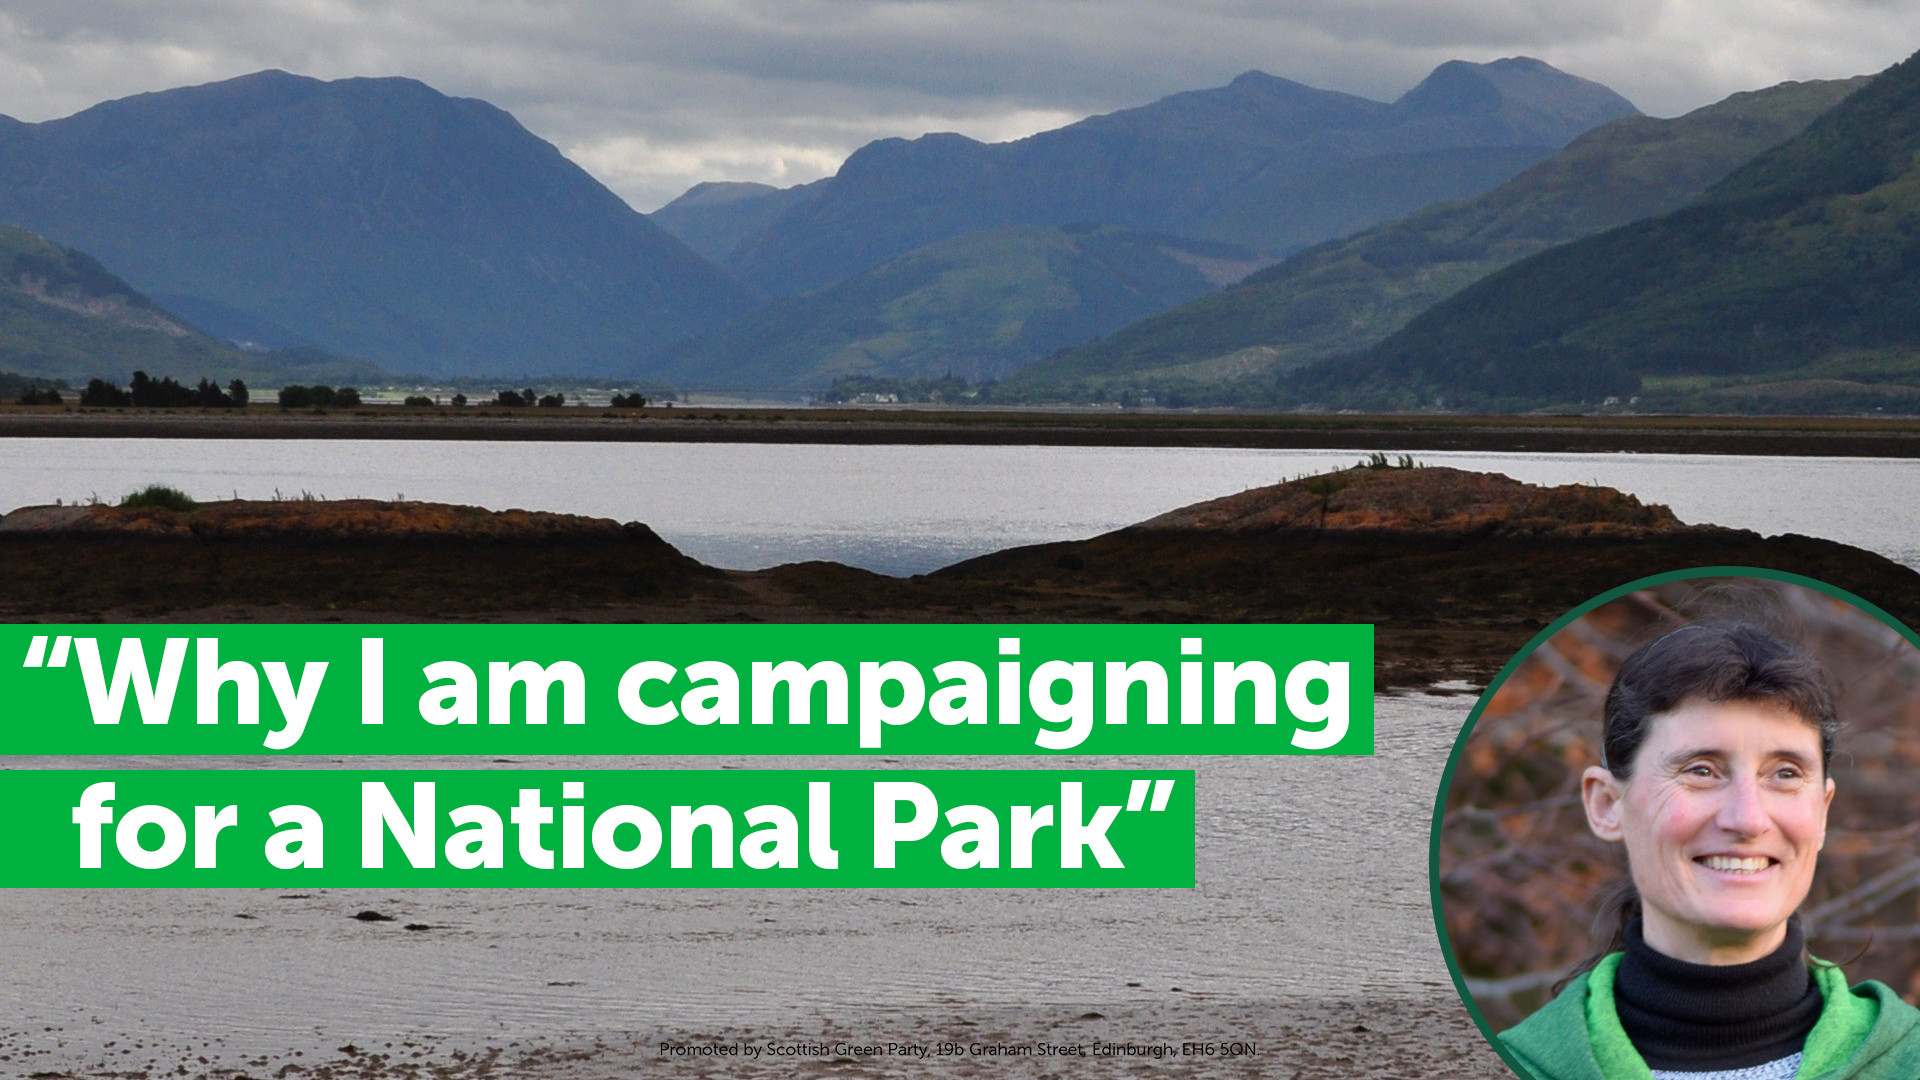 PHOTO: Lochaber with mountains and Loch. A bar of text reads
"Why I am campaigning for a National Park" - Councillor Kate Willis